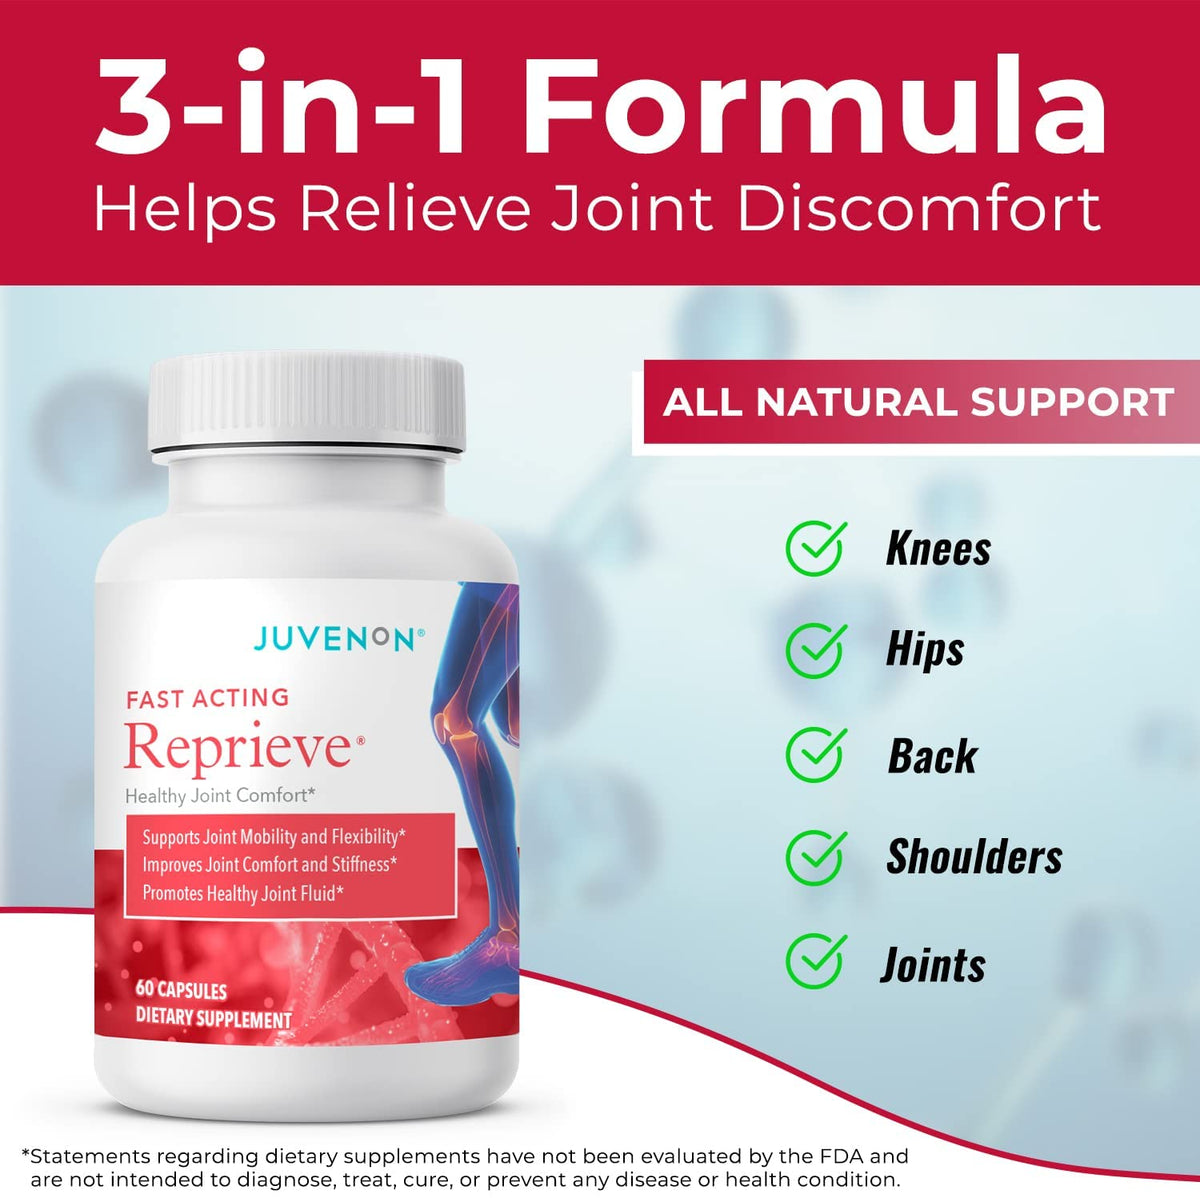 Juvenon Reprieve 3-in-1 formula helps relieve joint discomfort